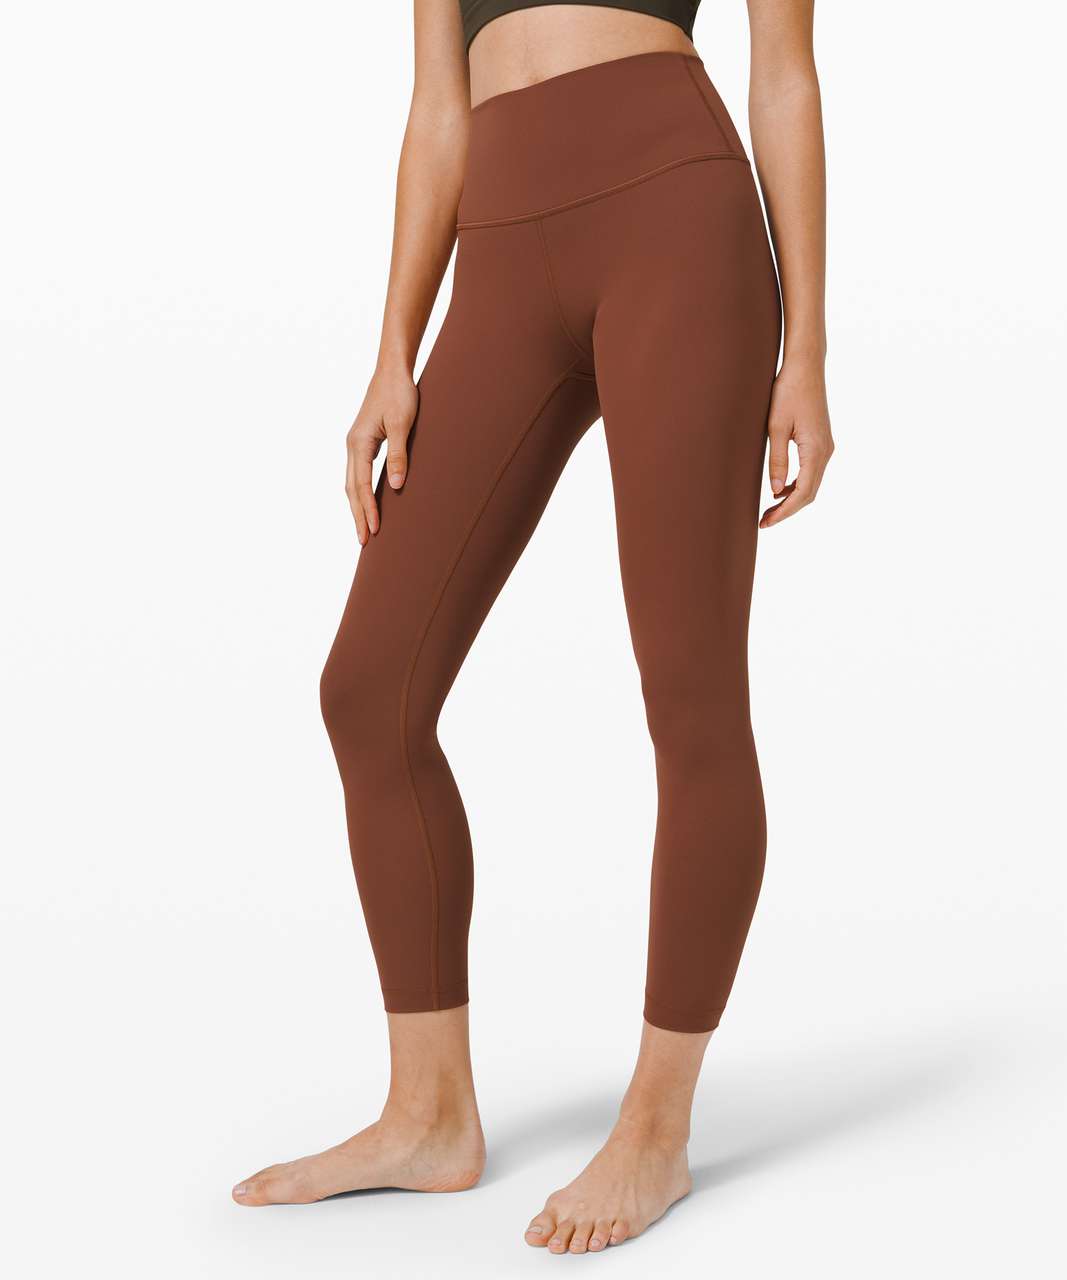 Lululemon Wunder Under High-Rise Tight 25" *Full-On Luxtreme - Ancient Copper